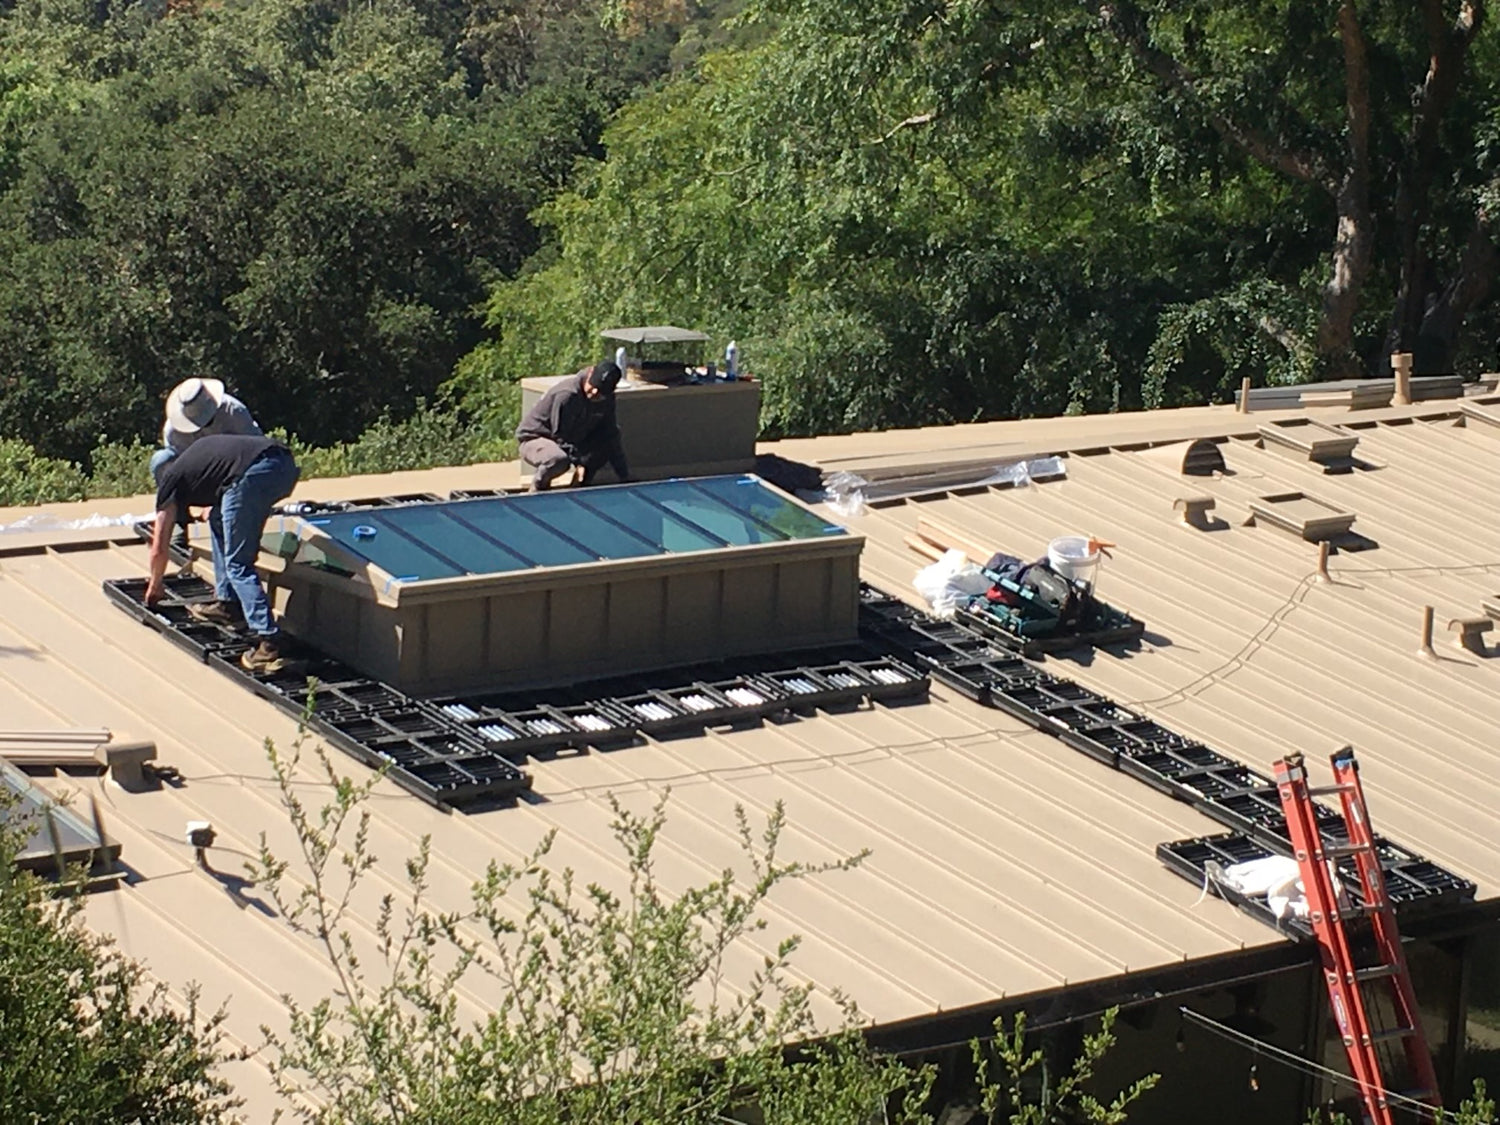 The RoofSmart Pads Work On All Sorts Of Roofing Materials Roofers, Solar Panel Installers, Skylight Installers, And Other Home Improvement Tradesman May Encounter. The RoofSmart Pad Is A Great Tool To Prevent Damages And Injuries At Job Sites.